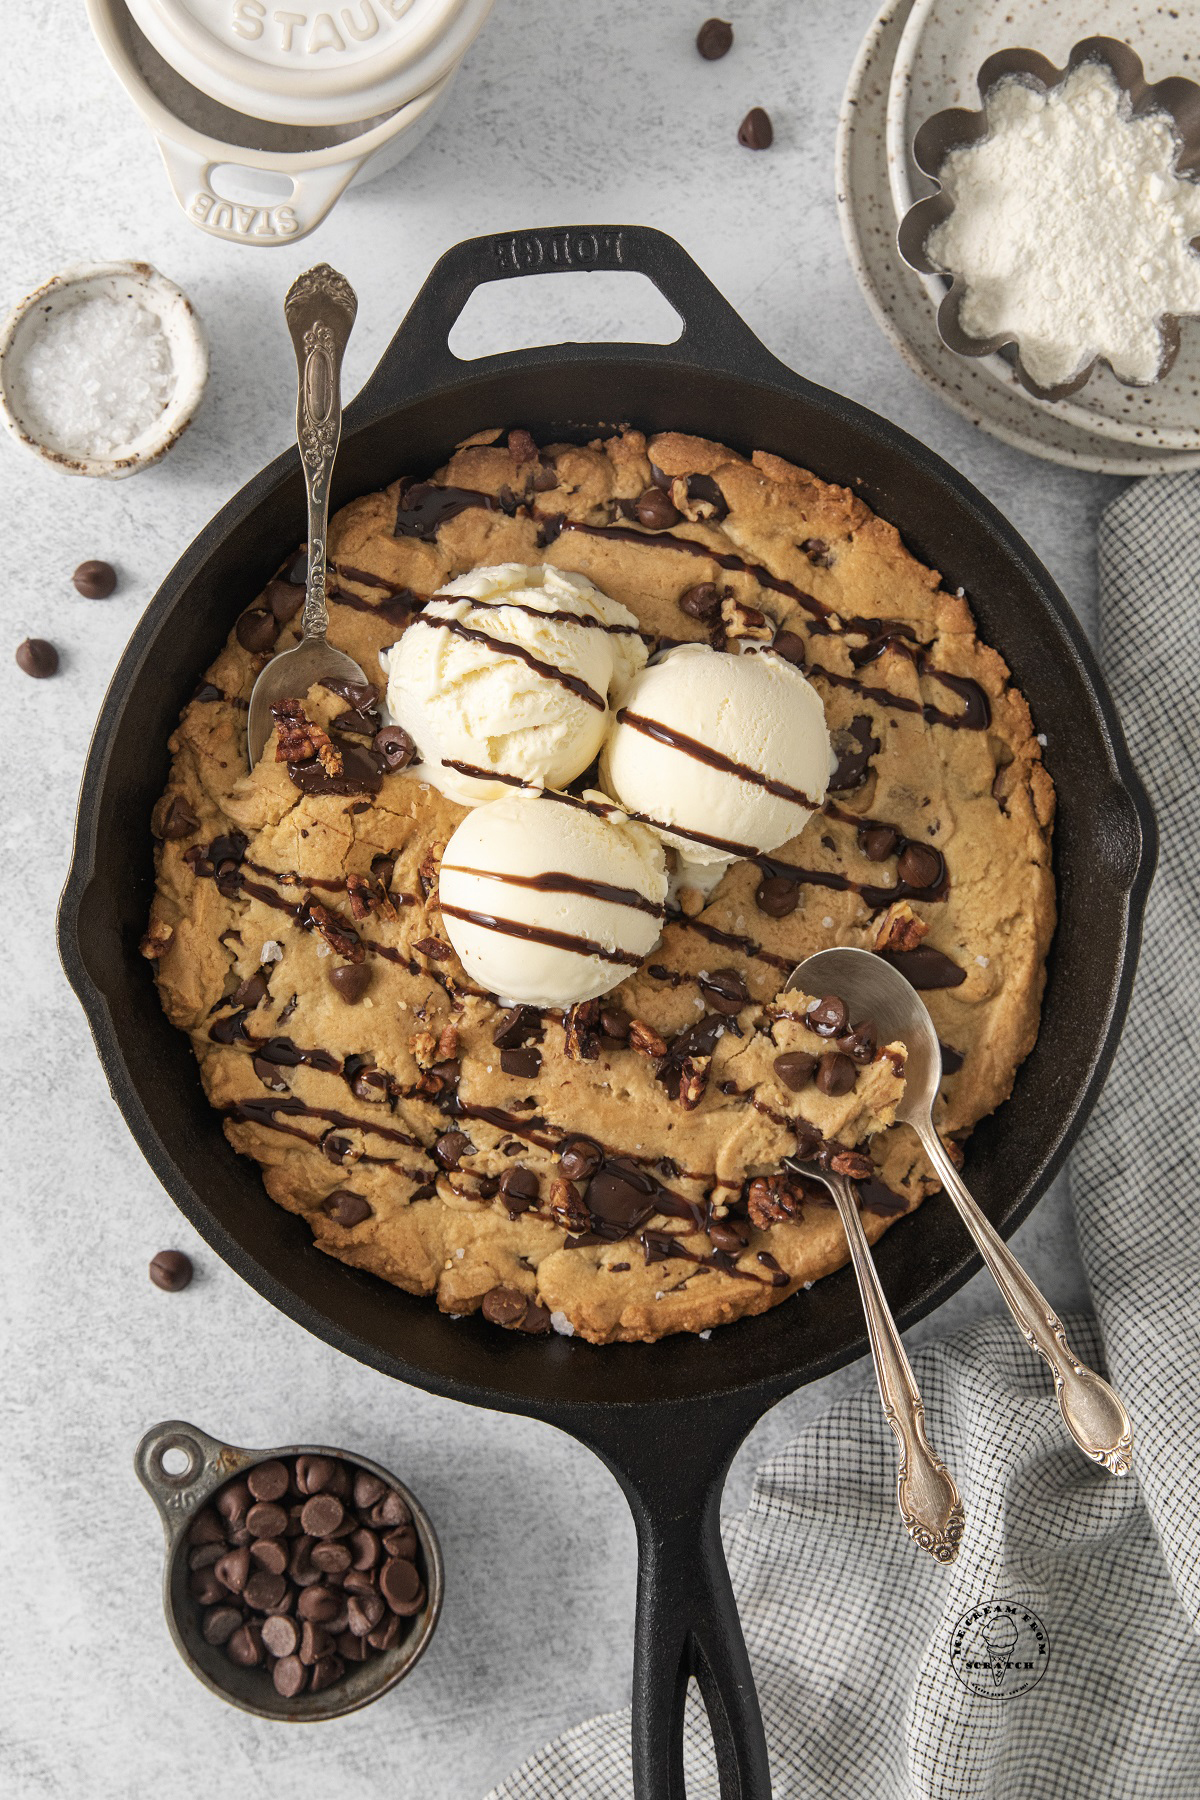 Easy Pizookie Recipe - Ice Cream From Scratch